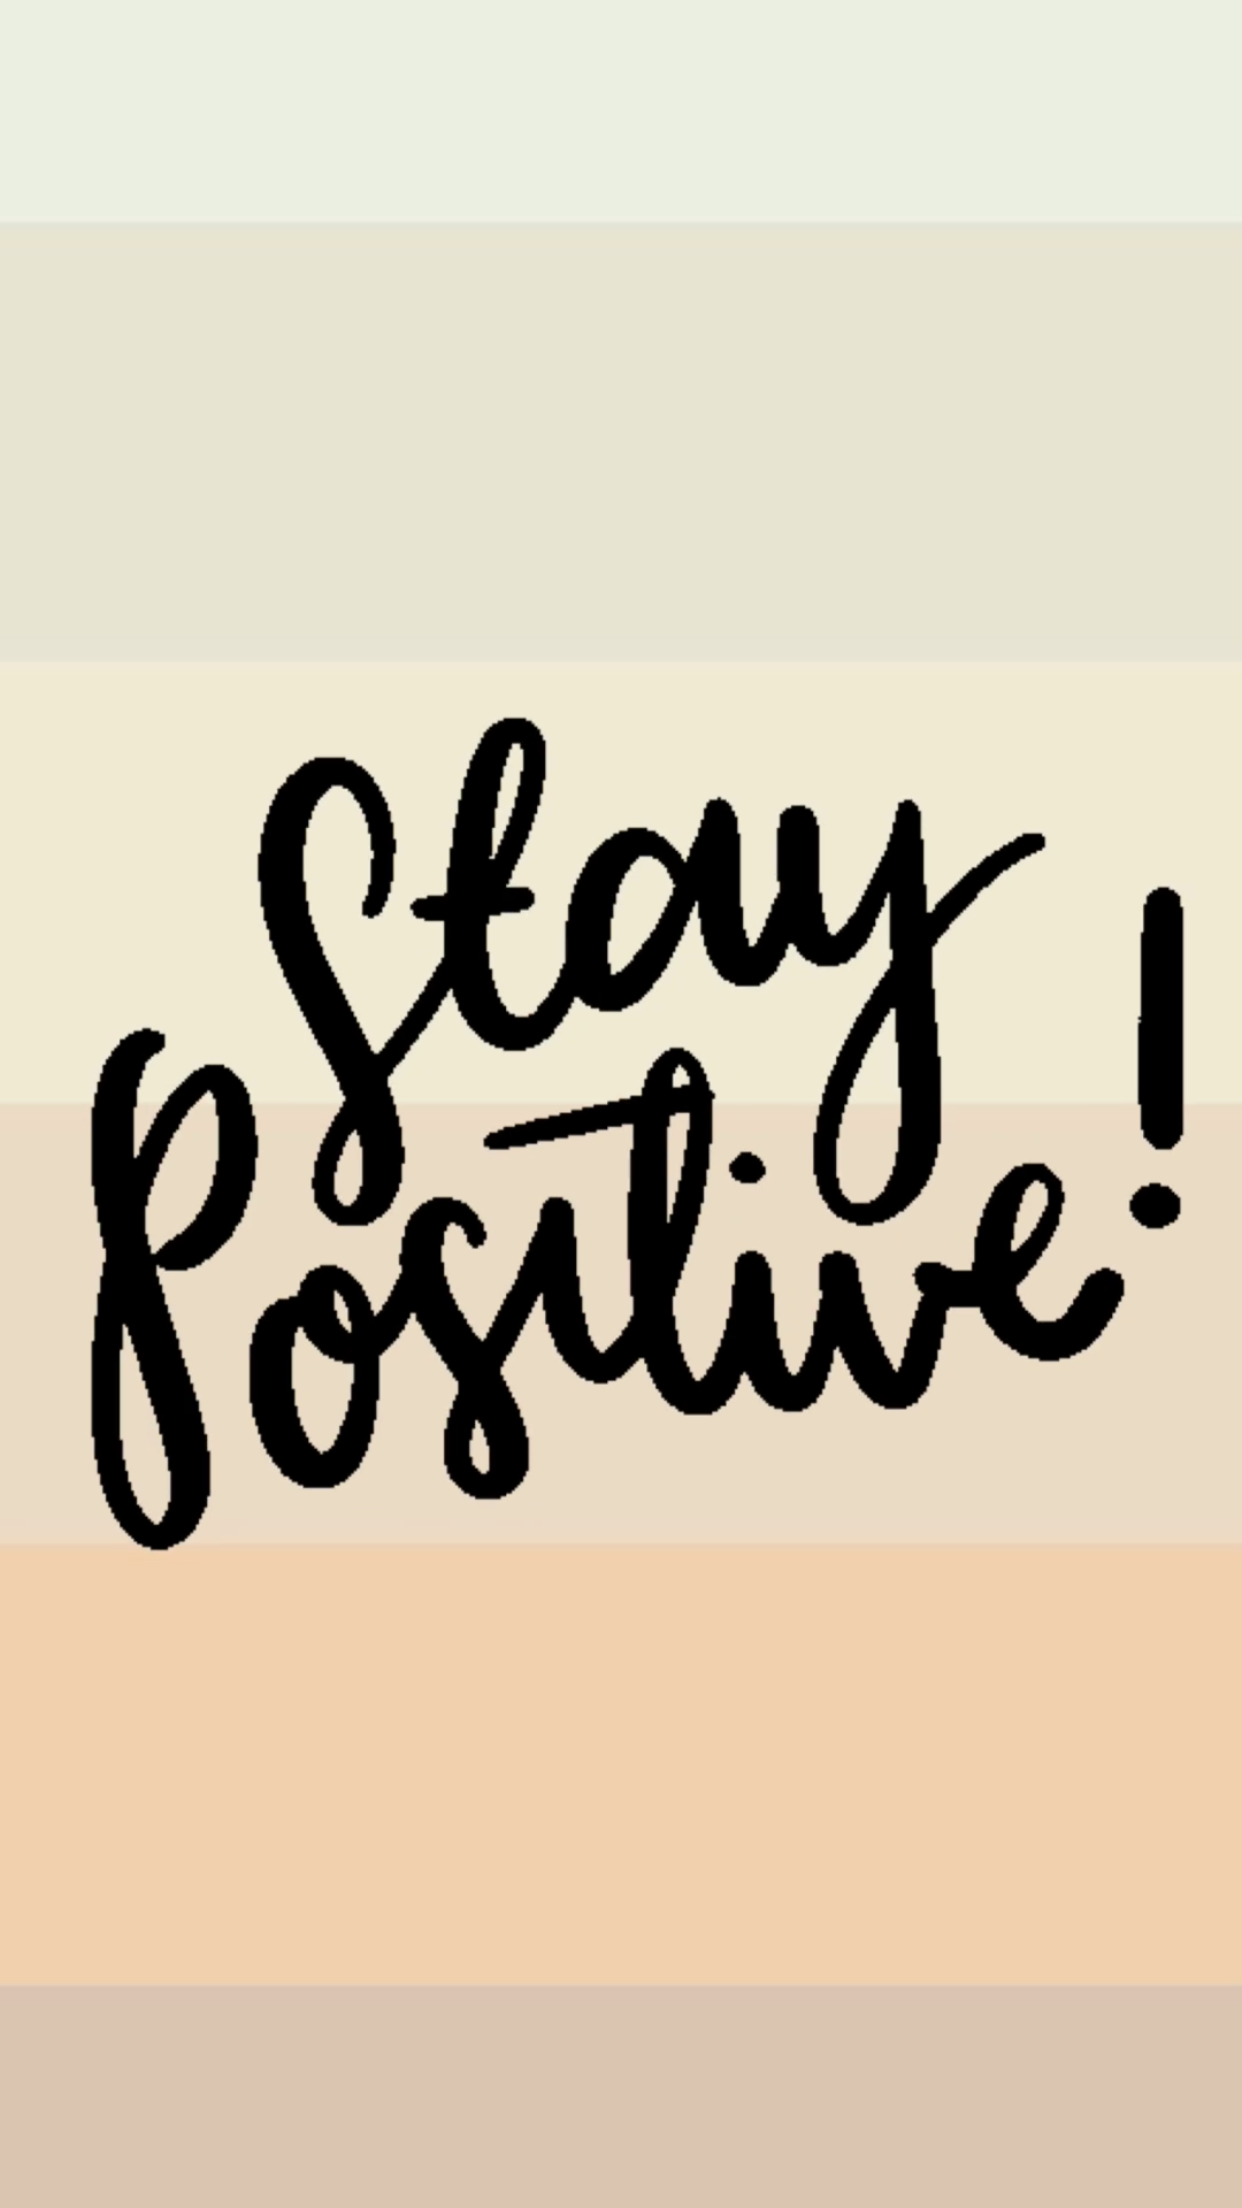 Stay Positive. Positive wallpaper, Staying positive, You deserve better